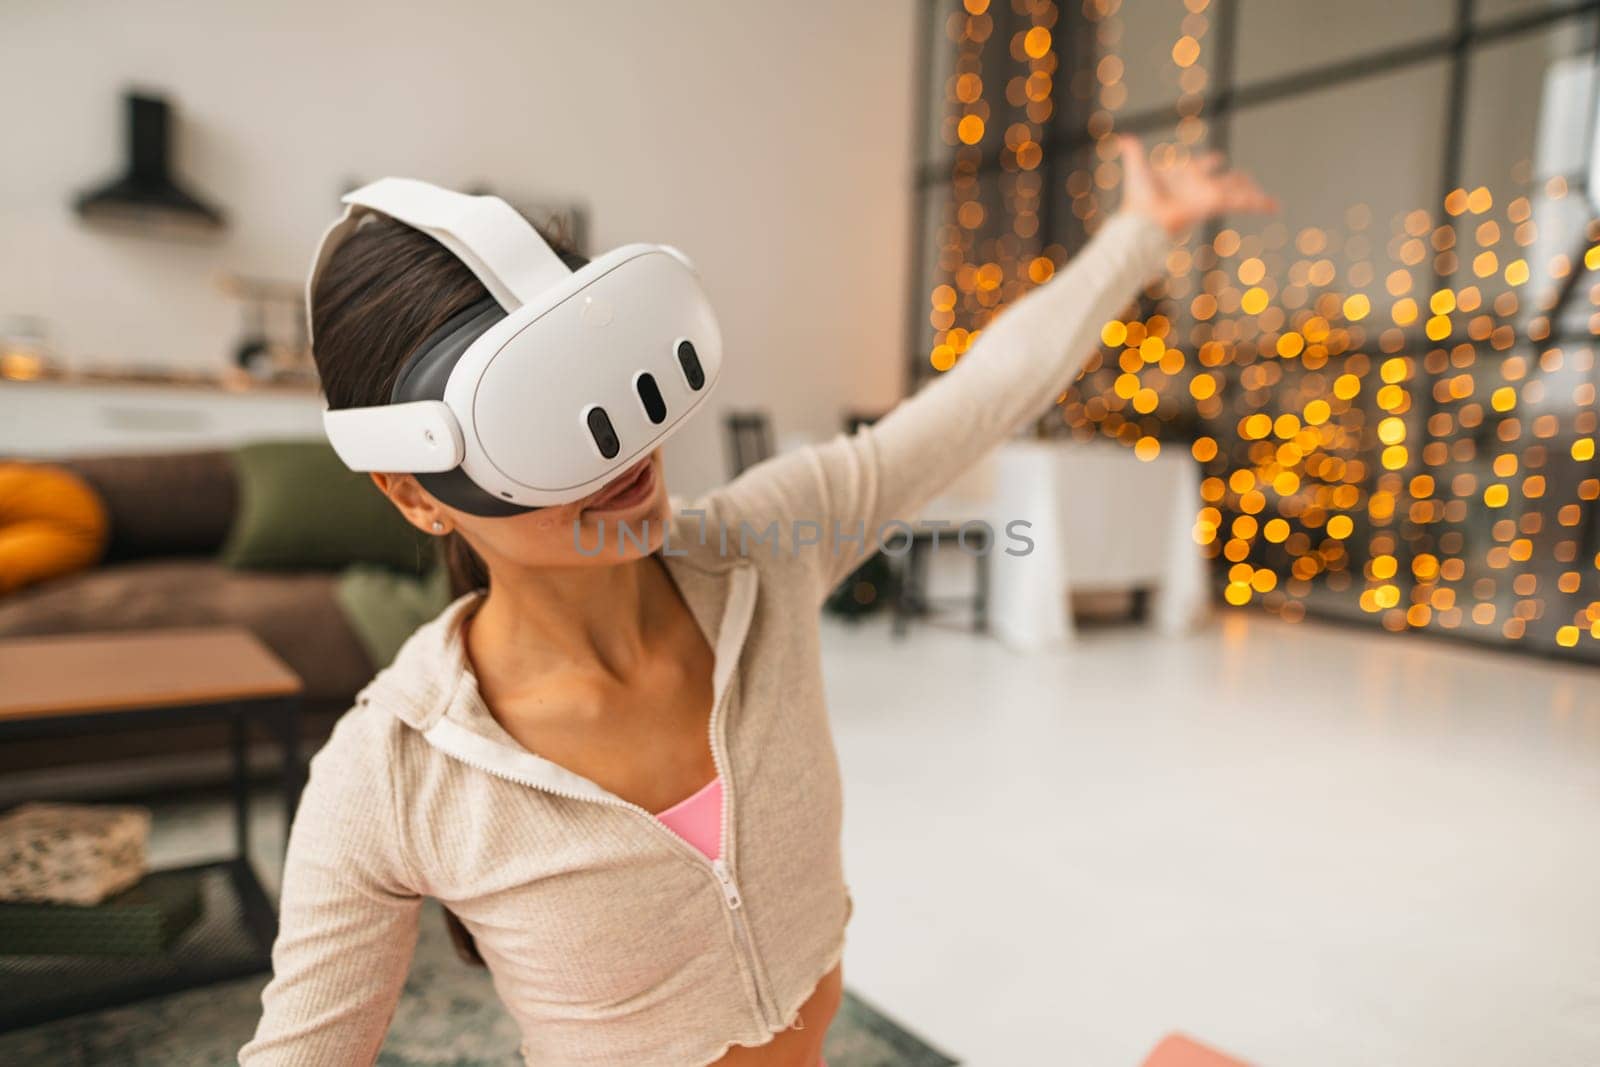 Using a virtual reality headset, a fitness trainer conducts online workout sessions at home during the Christmas holiday season. High quality photo